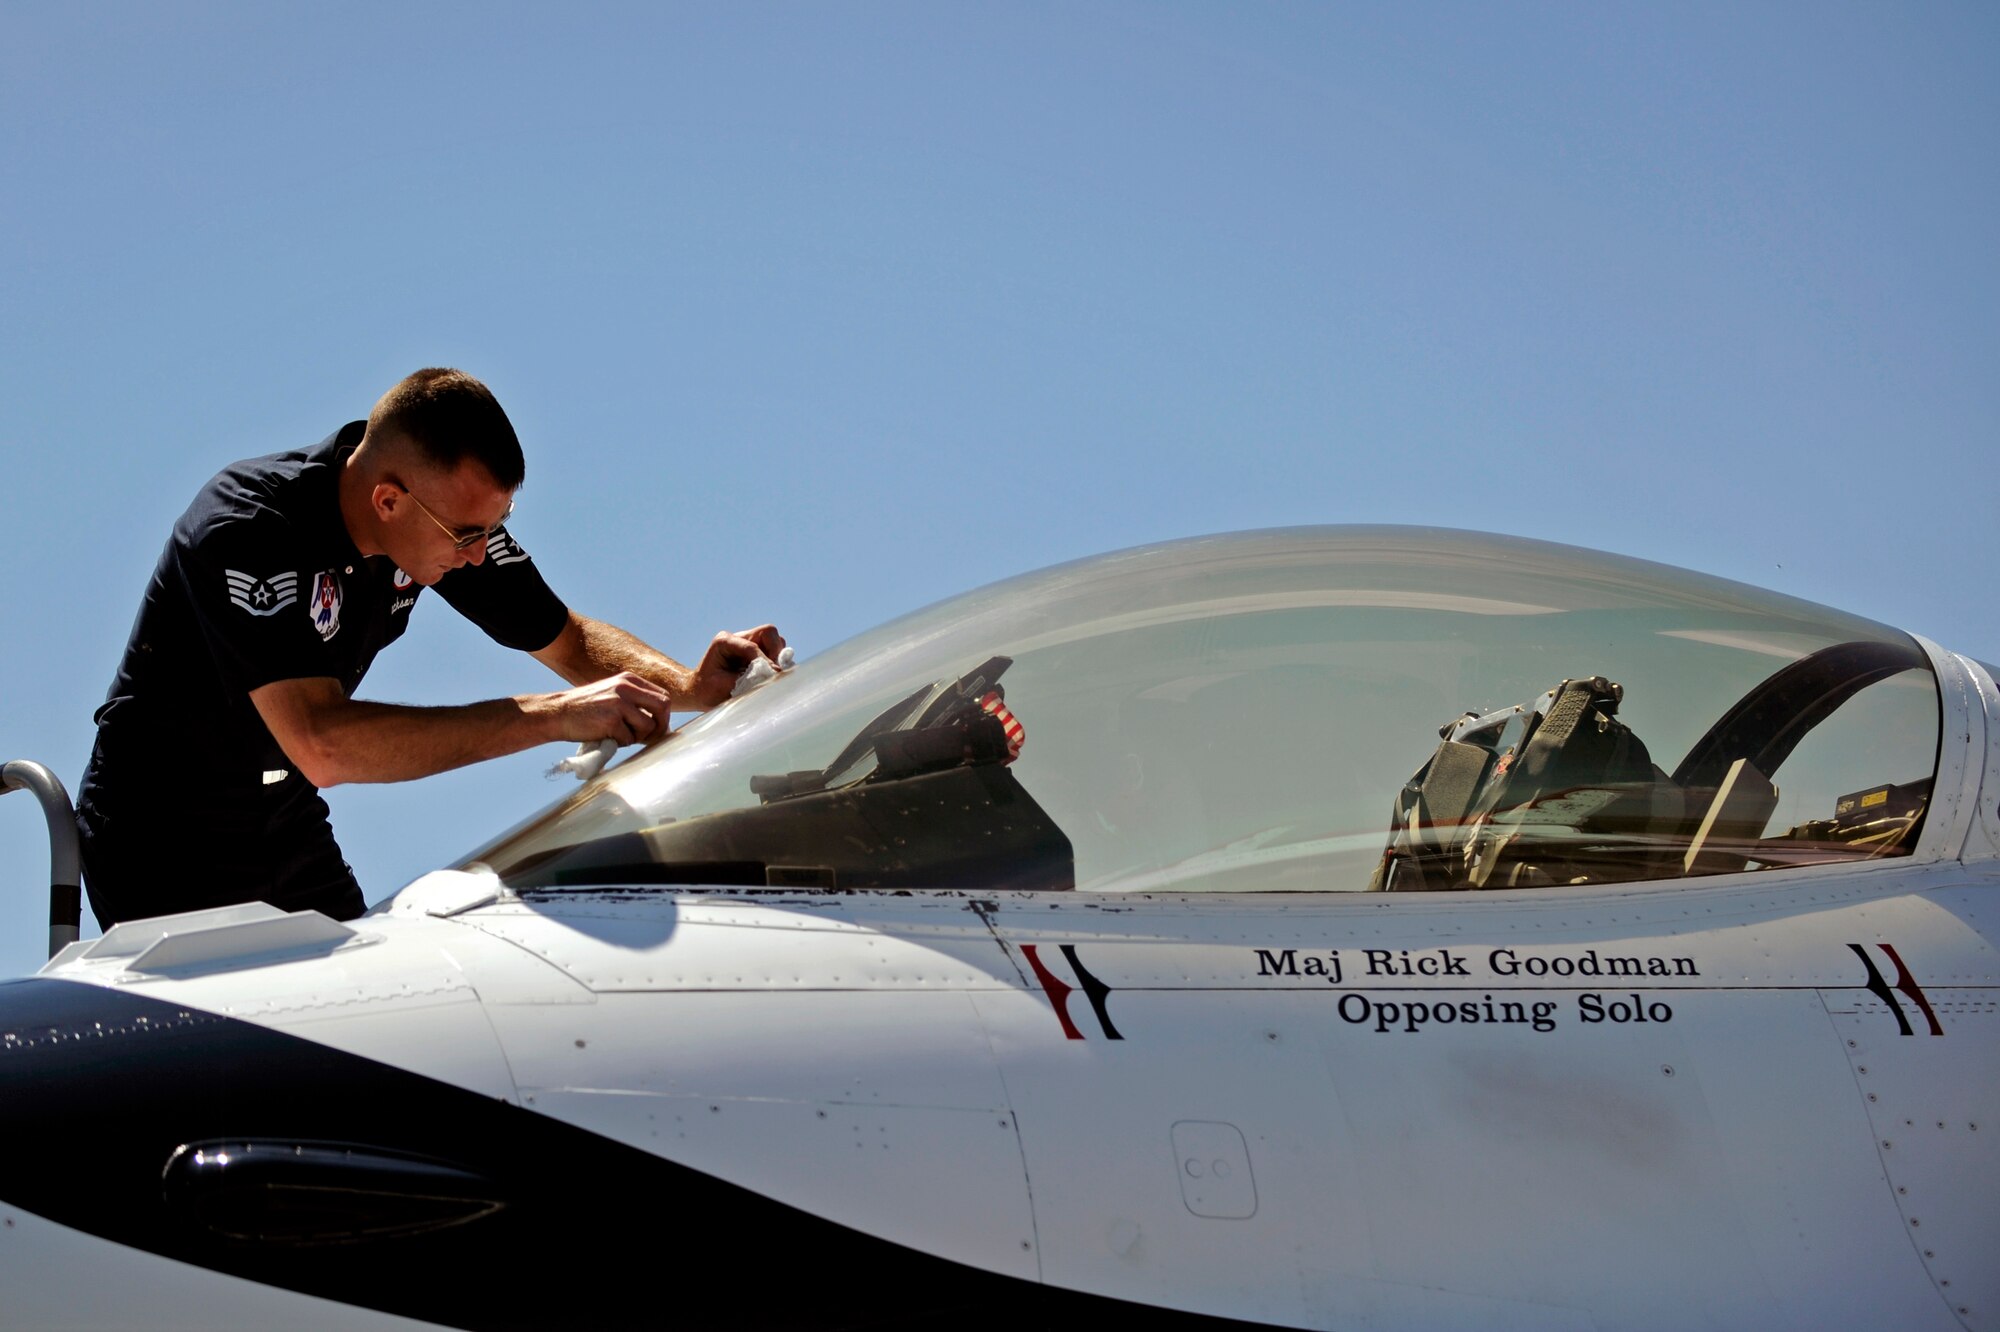 Staff Sgt. Jeremy Jackson, U.S. Air Force Thunderbirds dedicated crew chief on Thunderbirds No. 7 aircraft, cleans the canopy of the F-16 Fighting Falcon here, May 29, for the upcoming Dakota Thunder 2009 open house and air show here.  The Thunderbirds reinforce public confidence in the Air Force and demonstrate the professional competence of Air Force members to the public. (U.S. Air Force photo/Airman 1st Class Matthew Flynn)